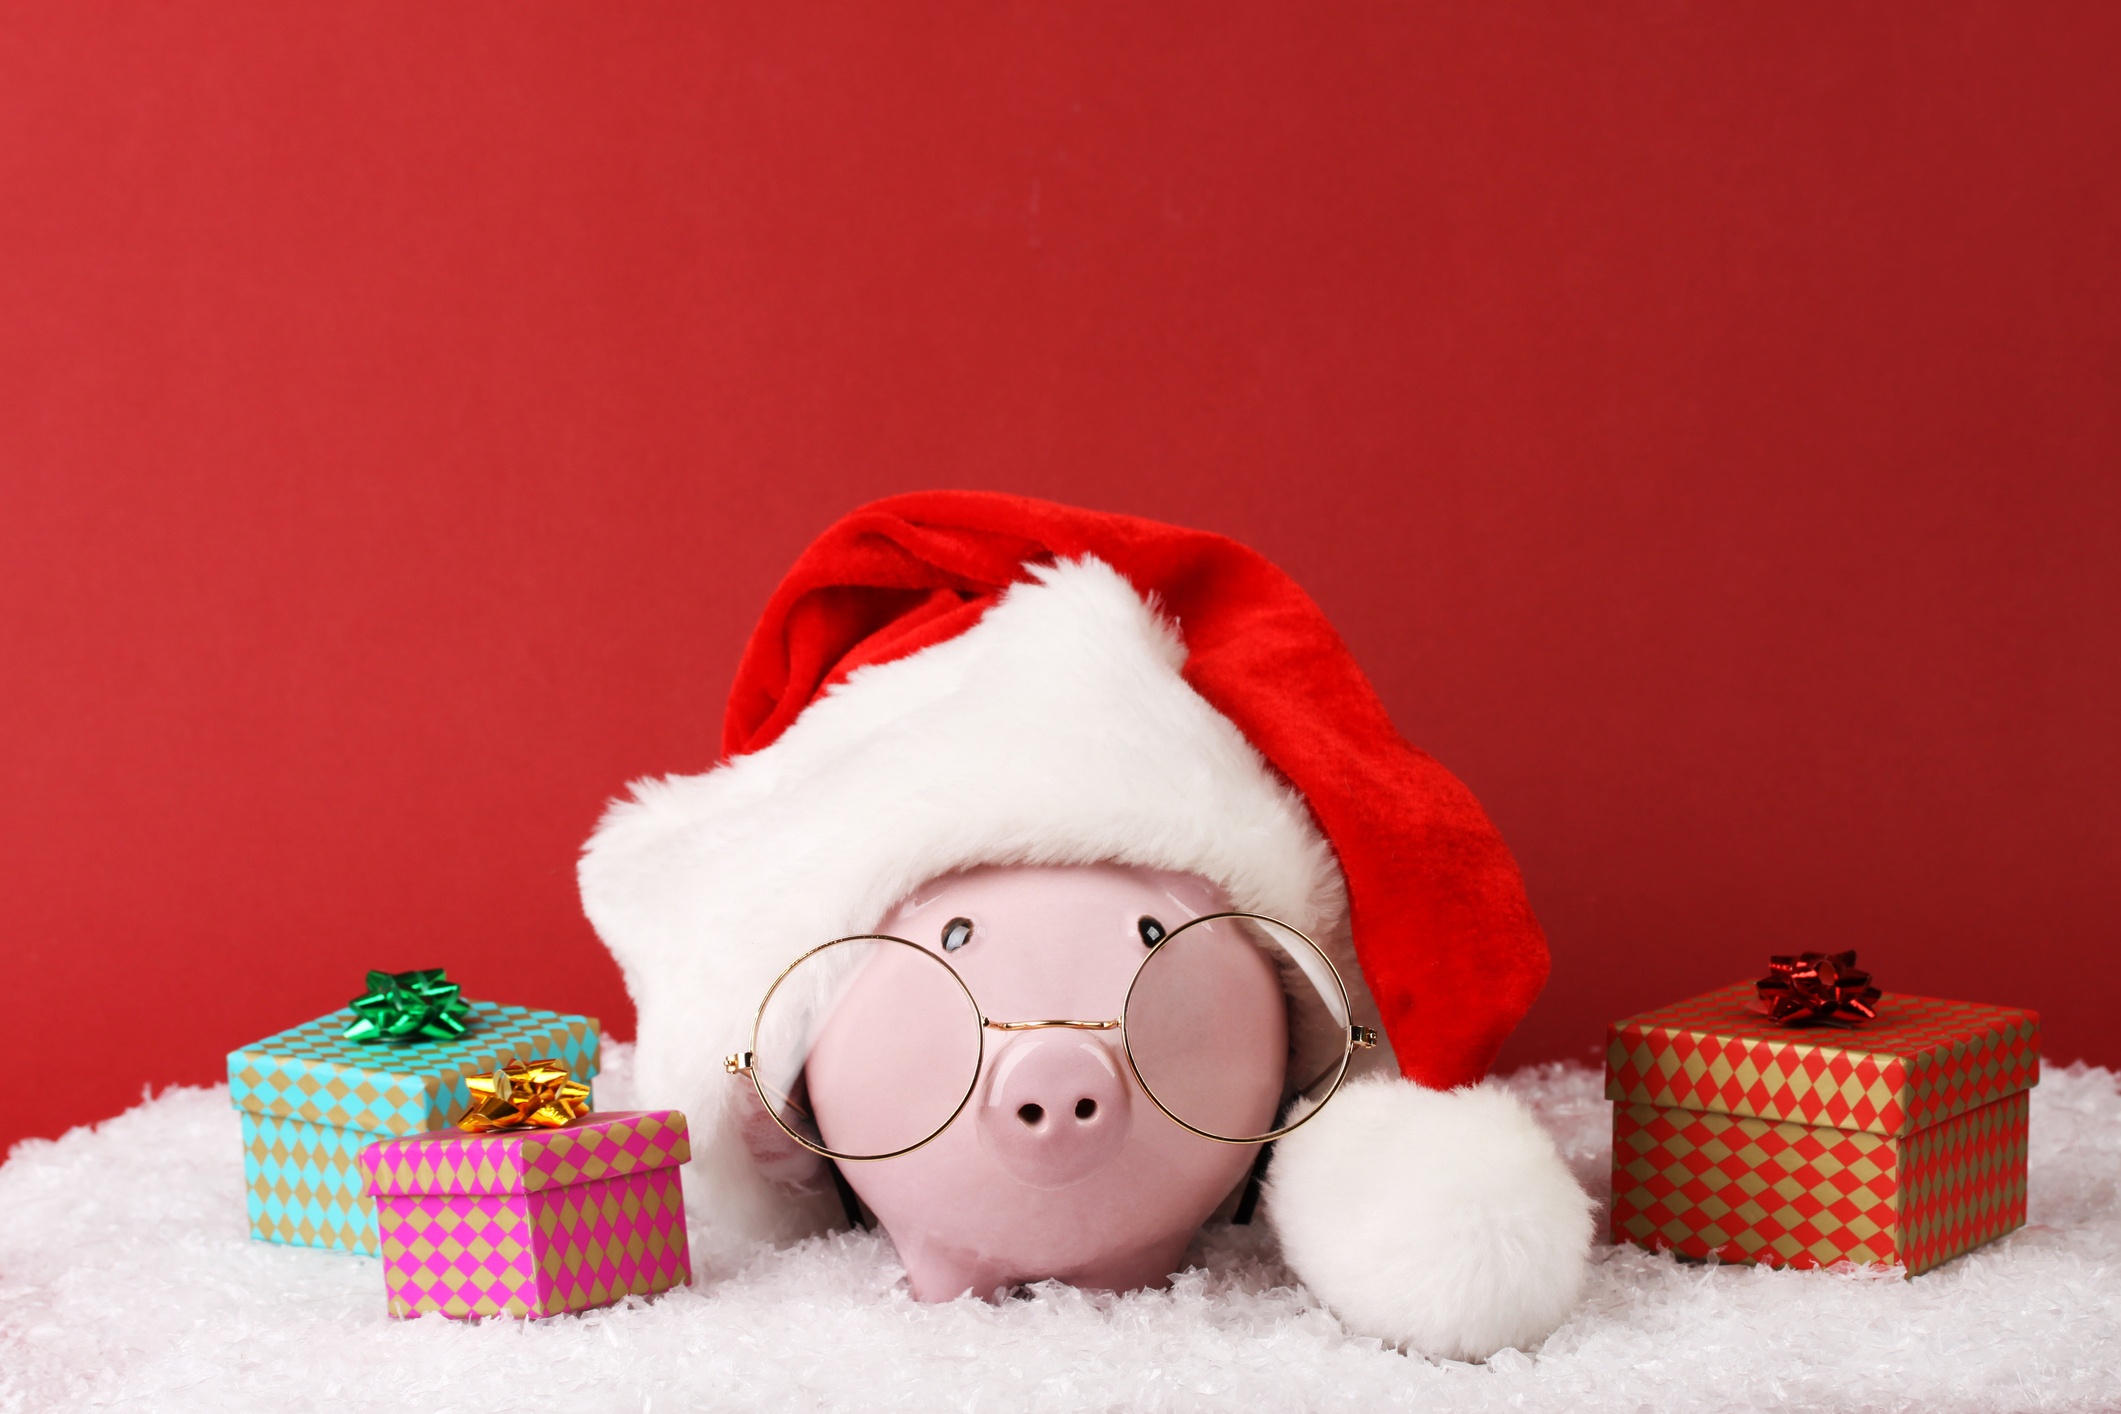 Staying on budget this holiday season